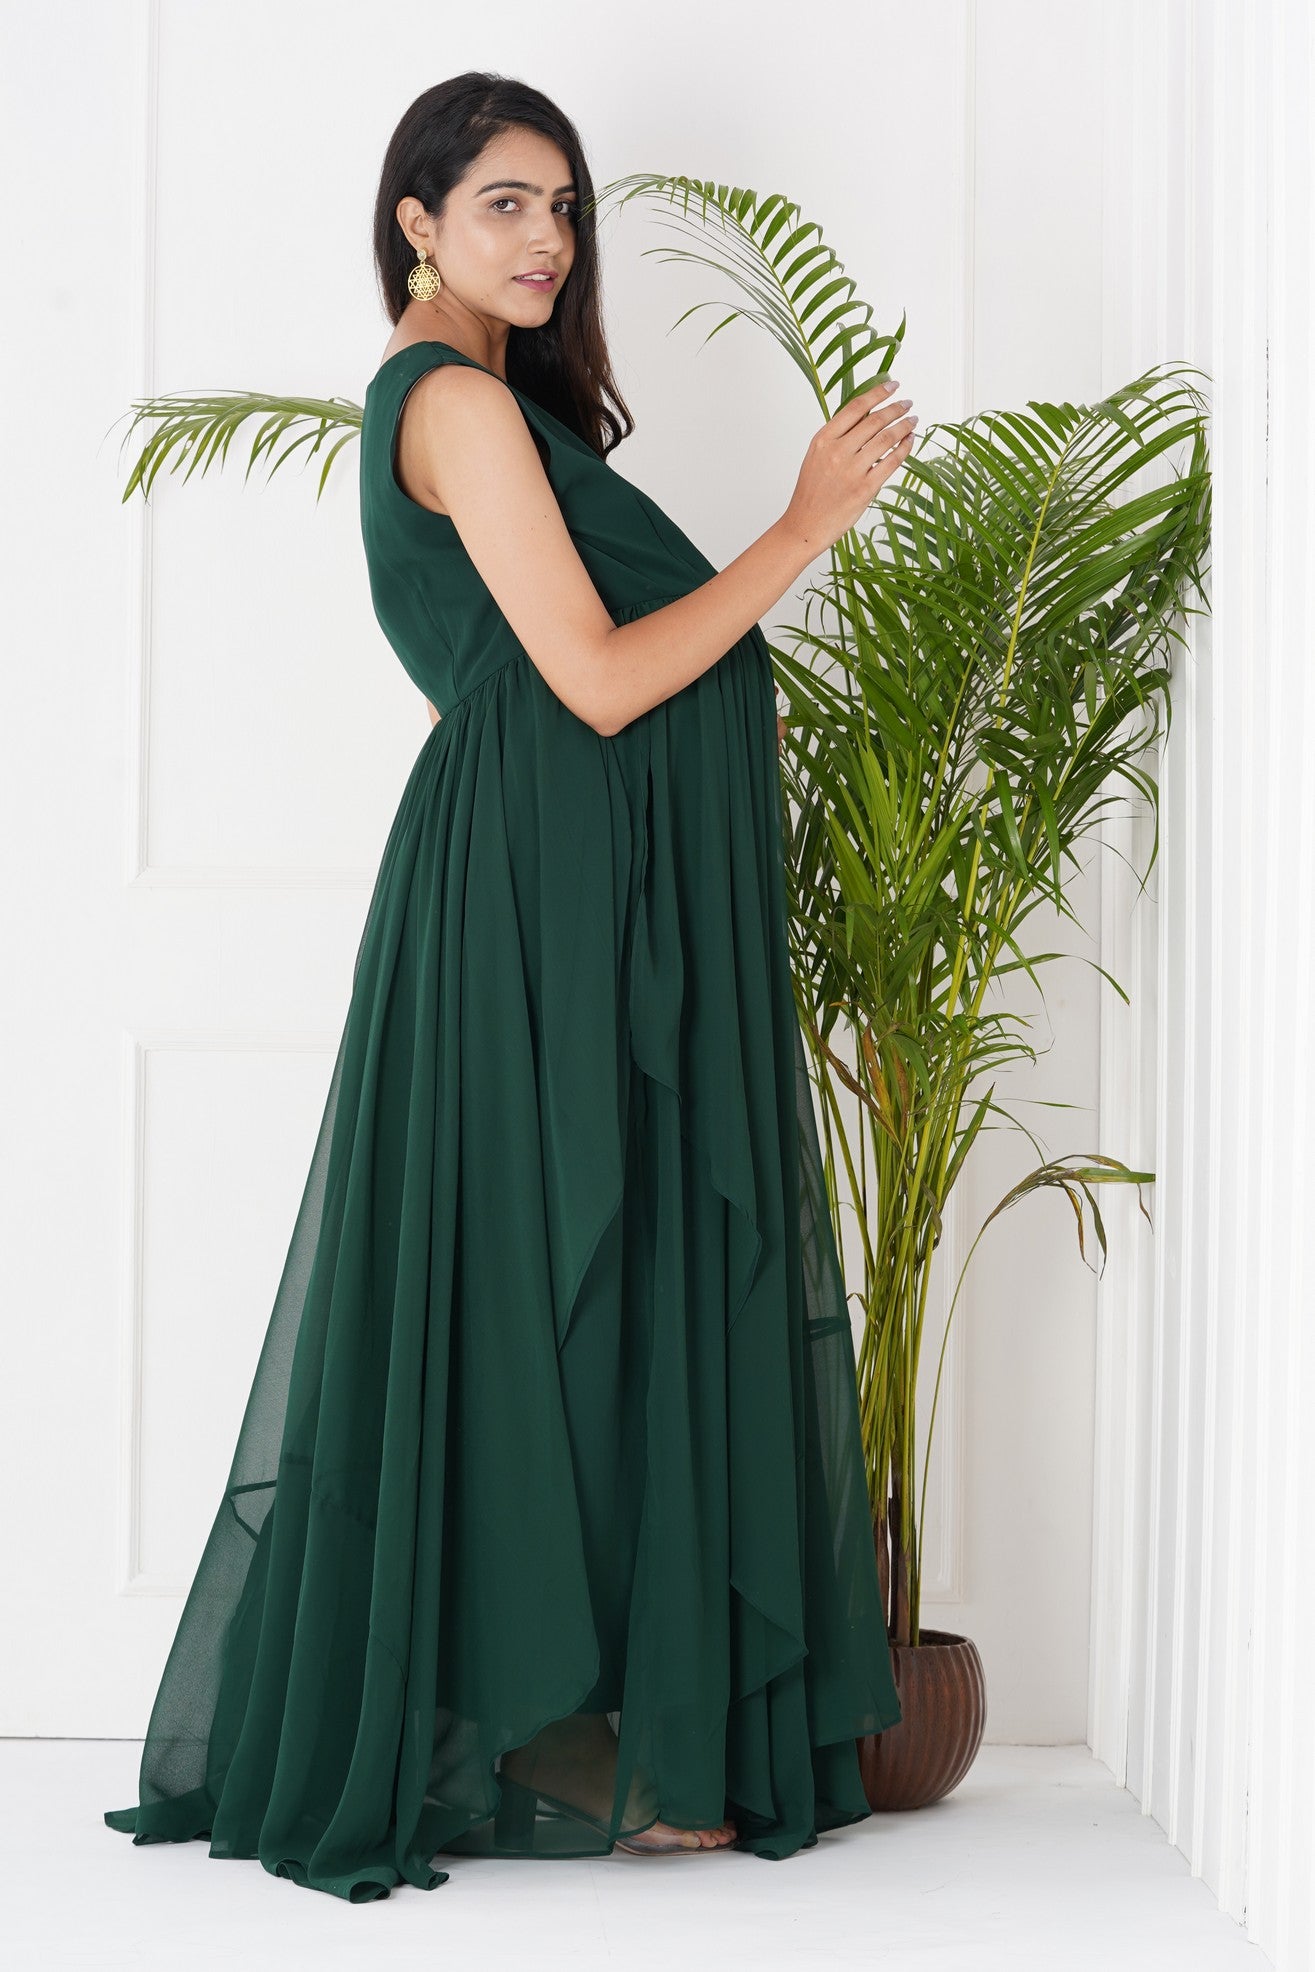 Maternity Gown with Sleeveless Elegance